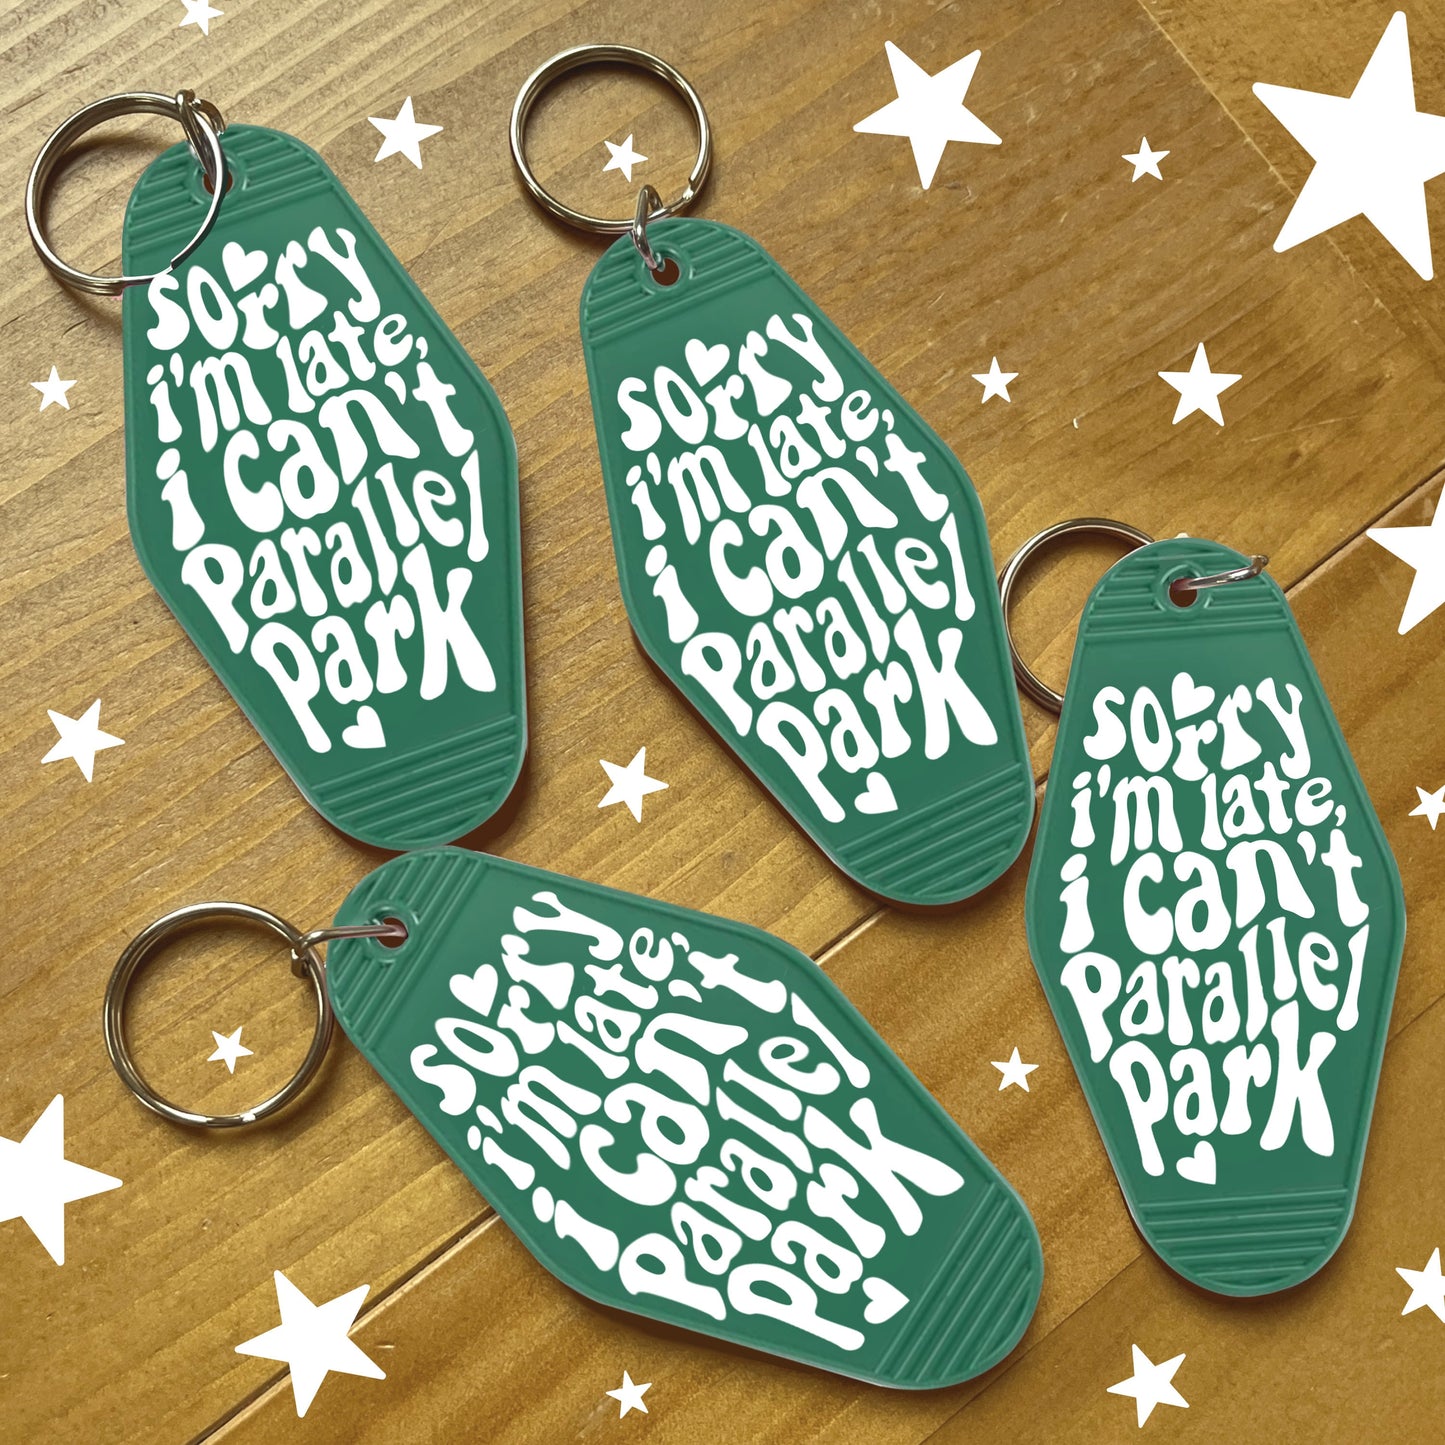 Sorry I'm Late I Can't Parallel Park Keychain | Green Motel Style Keychains, Passed Driving Test, Driving Test Gift, First Car Gift